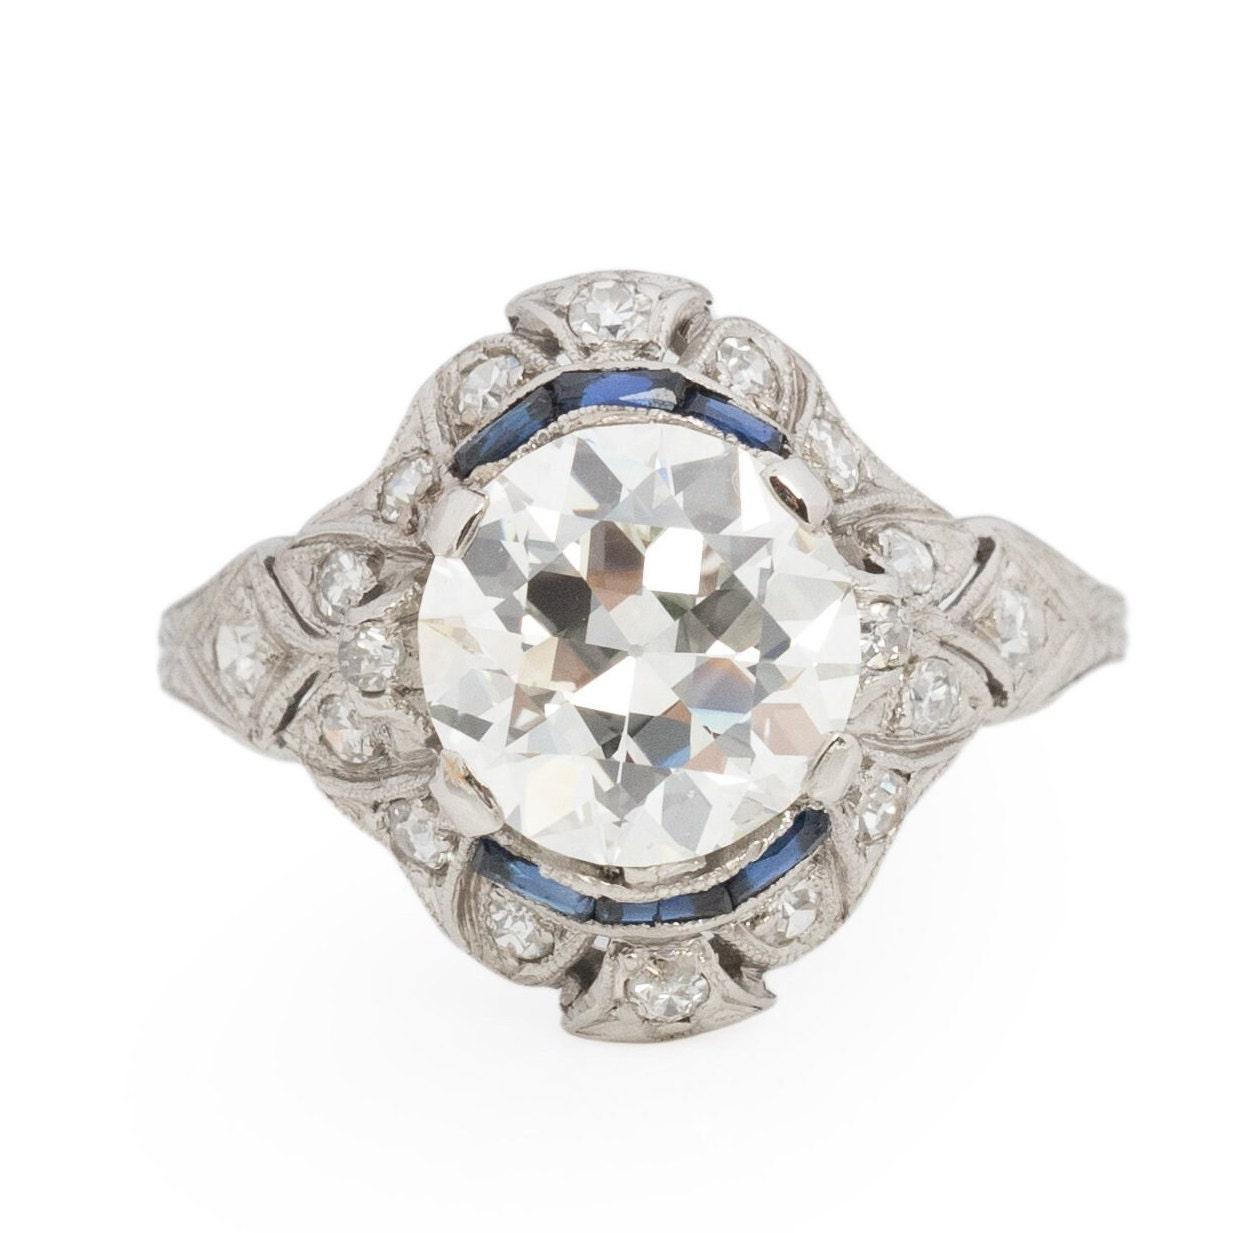 Behold this platinum Edwardian engagement ring of unparalleled beauty. Its tapered shanks bear intricate engravings resembling delicate leaves that gracefully unfurl as they ascend. The center gem is embraced by an openwork geometric halo adorned